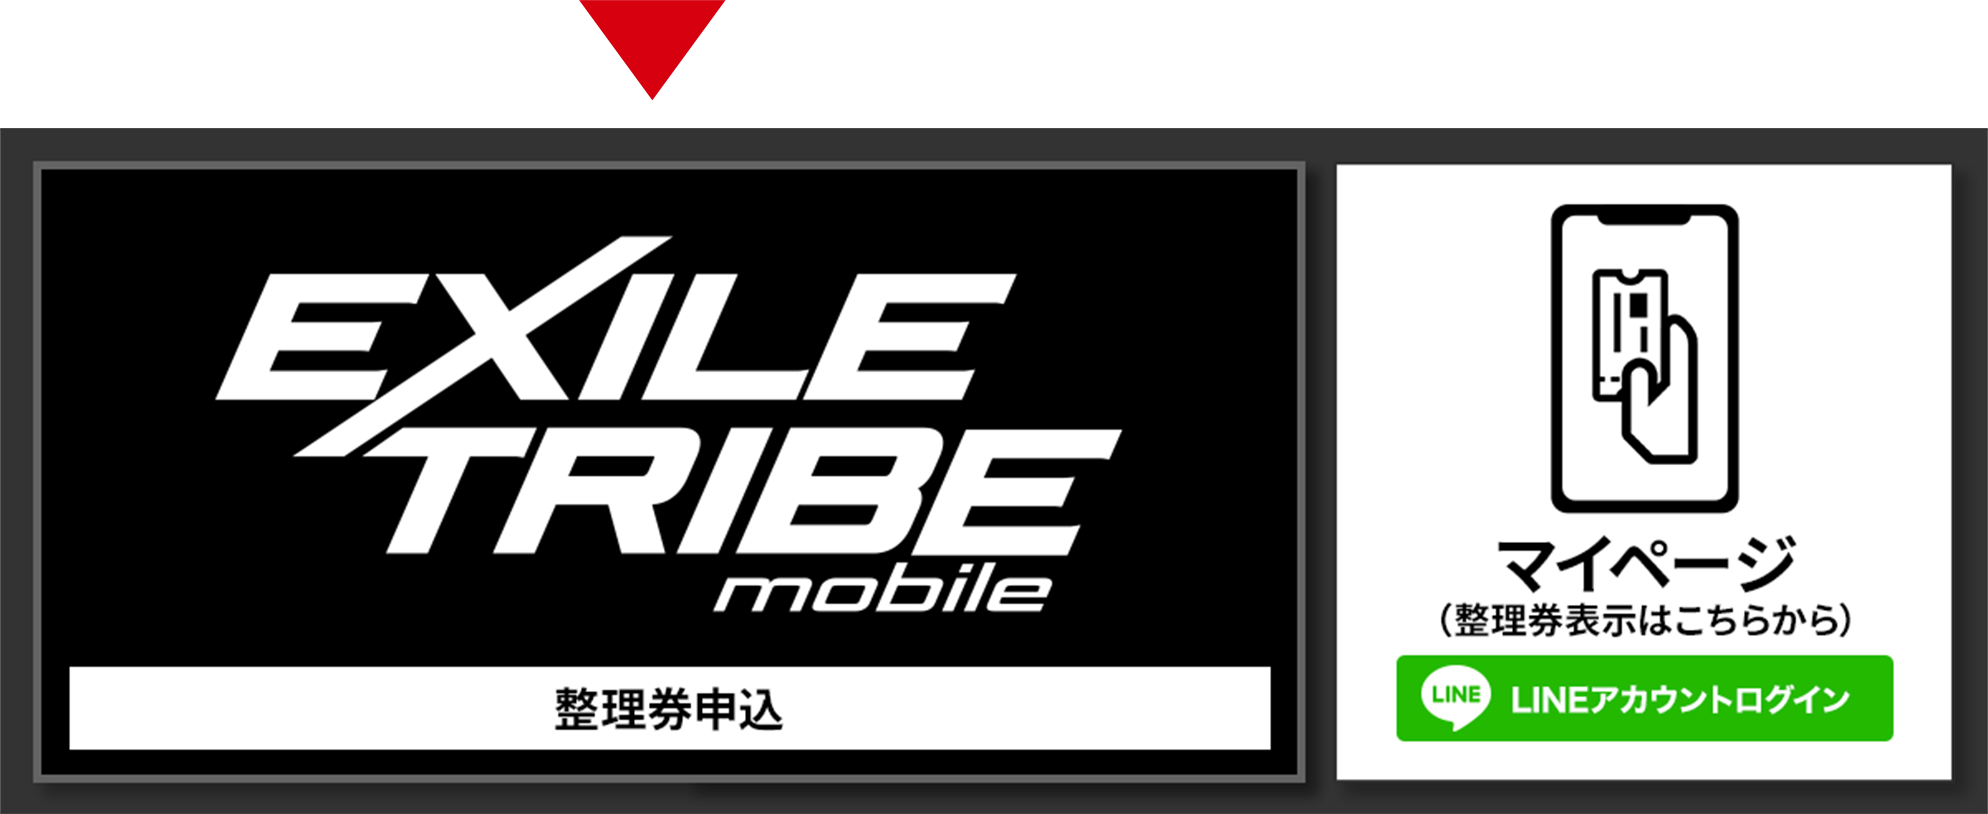 Exile tribe